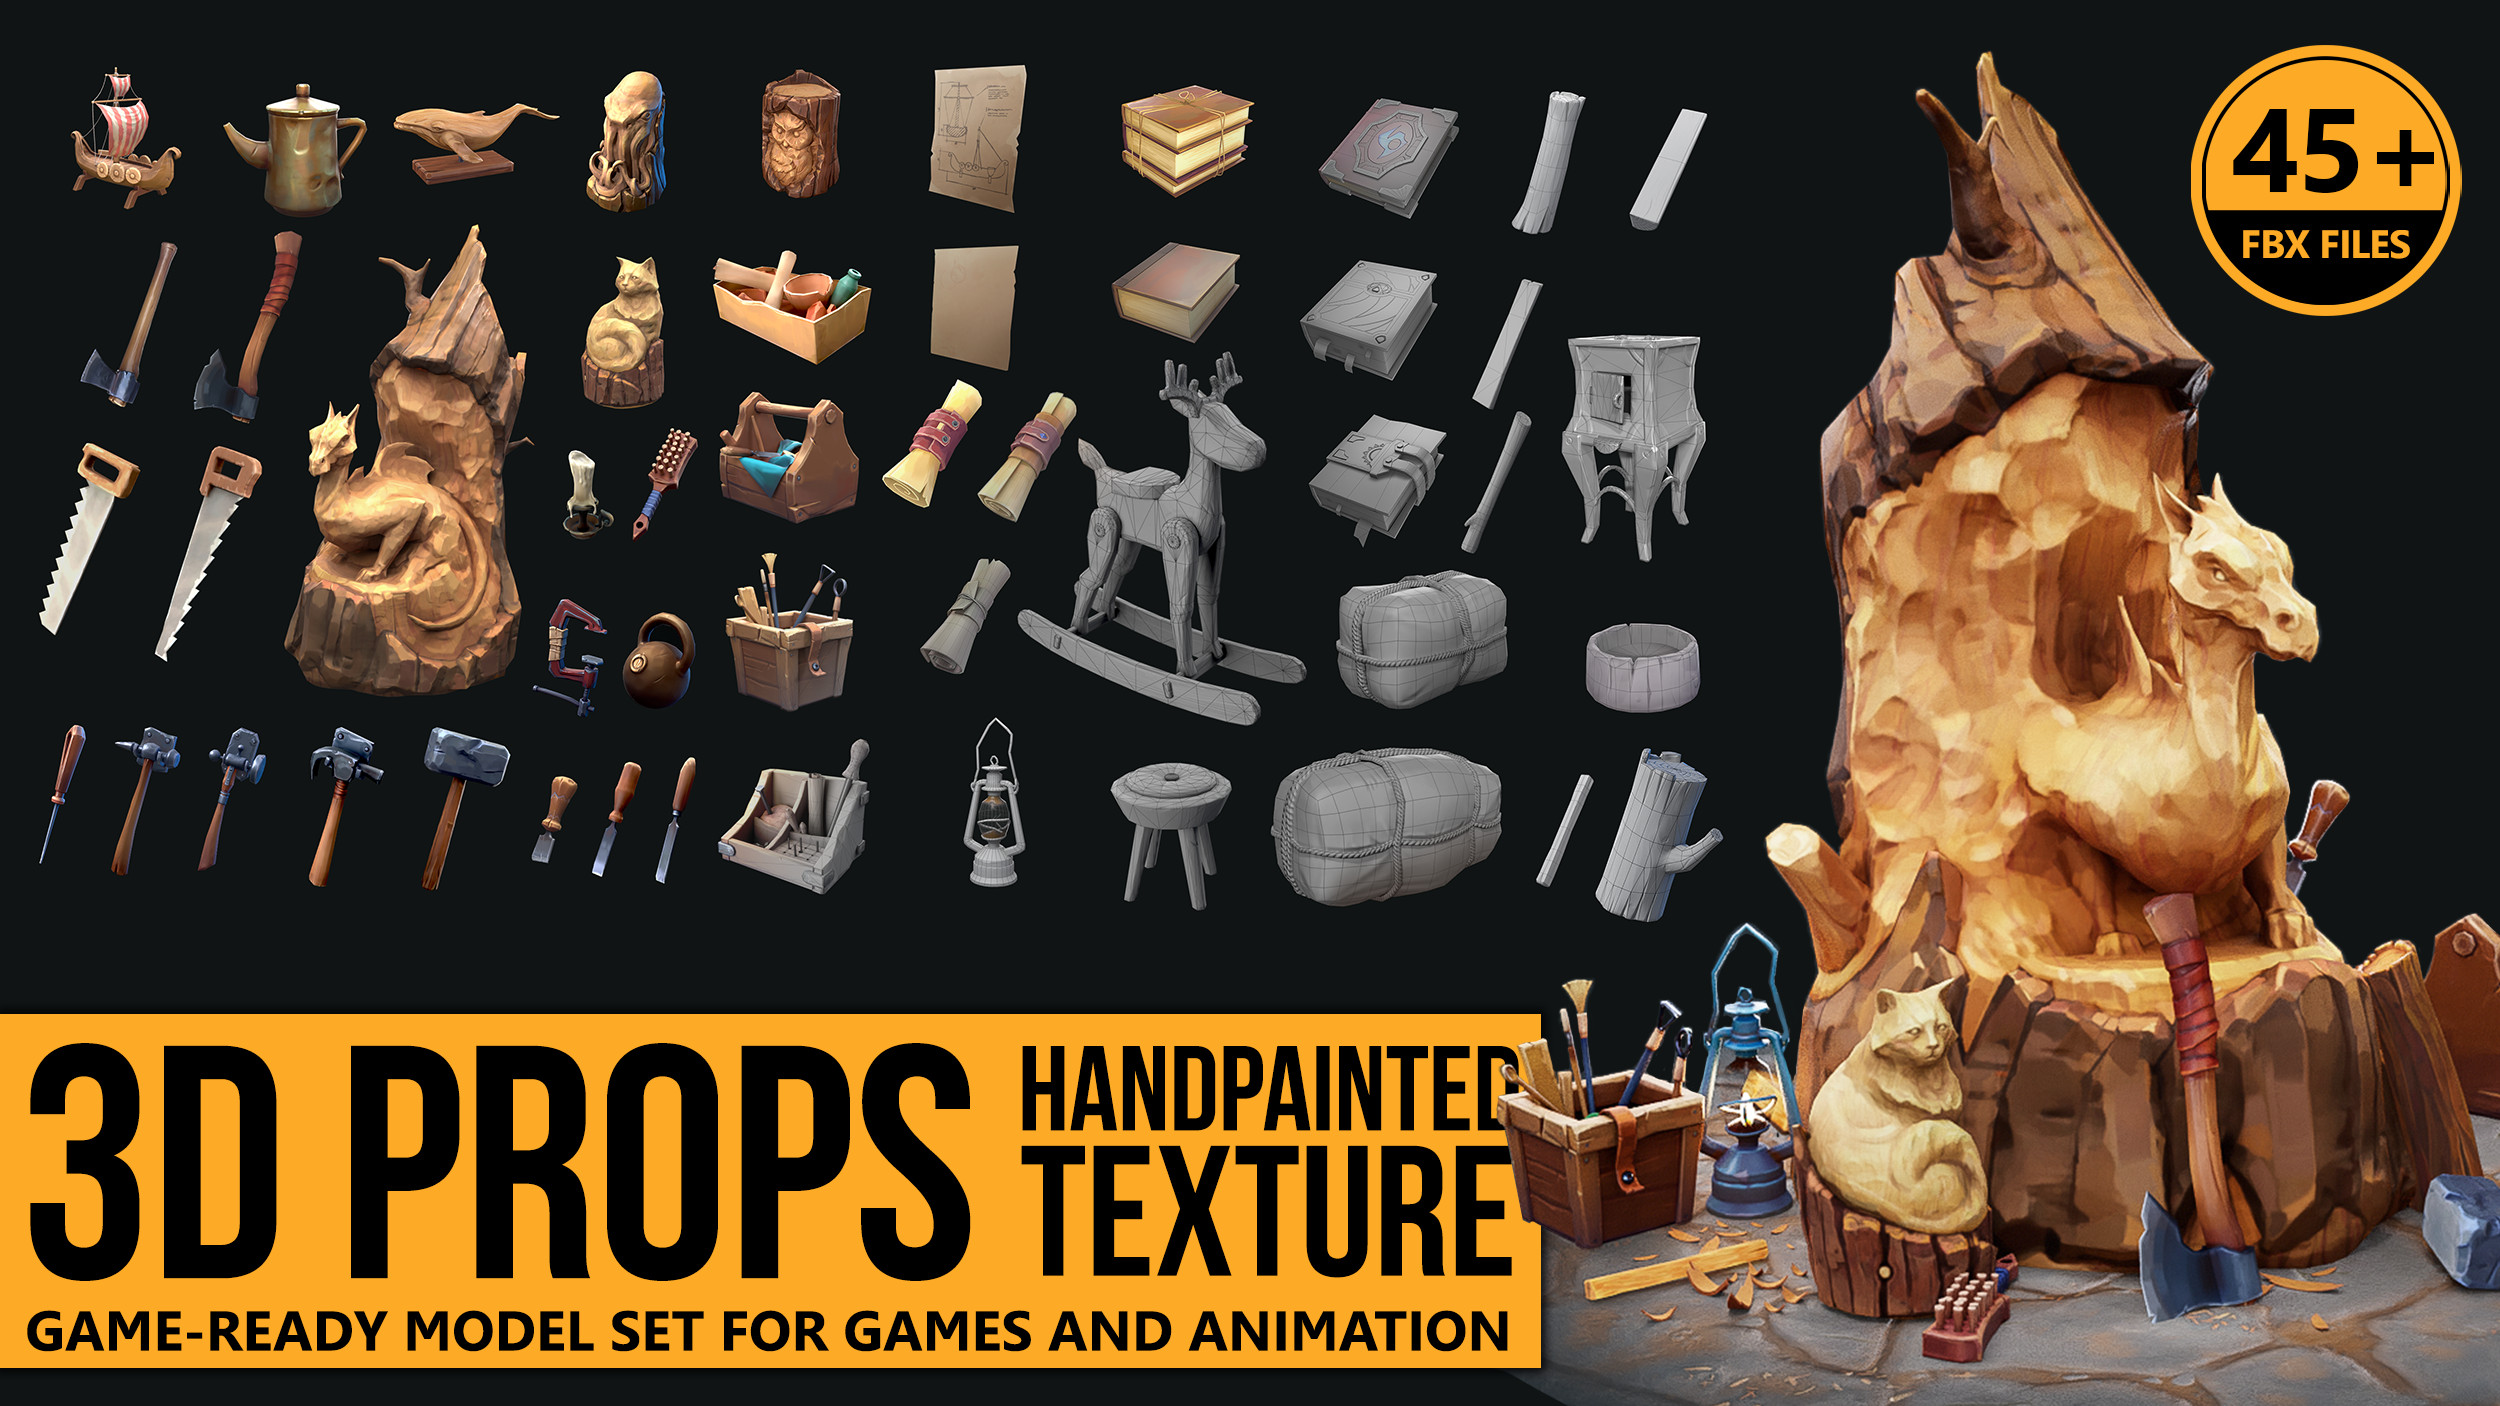 You can now buy the props here: https://www.artstation.com/a/30957001